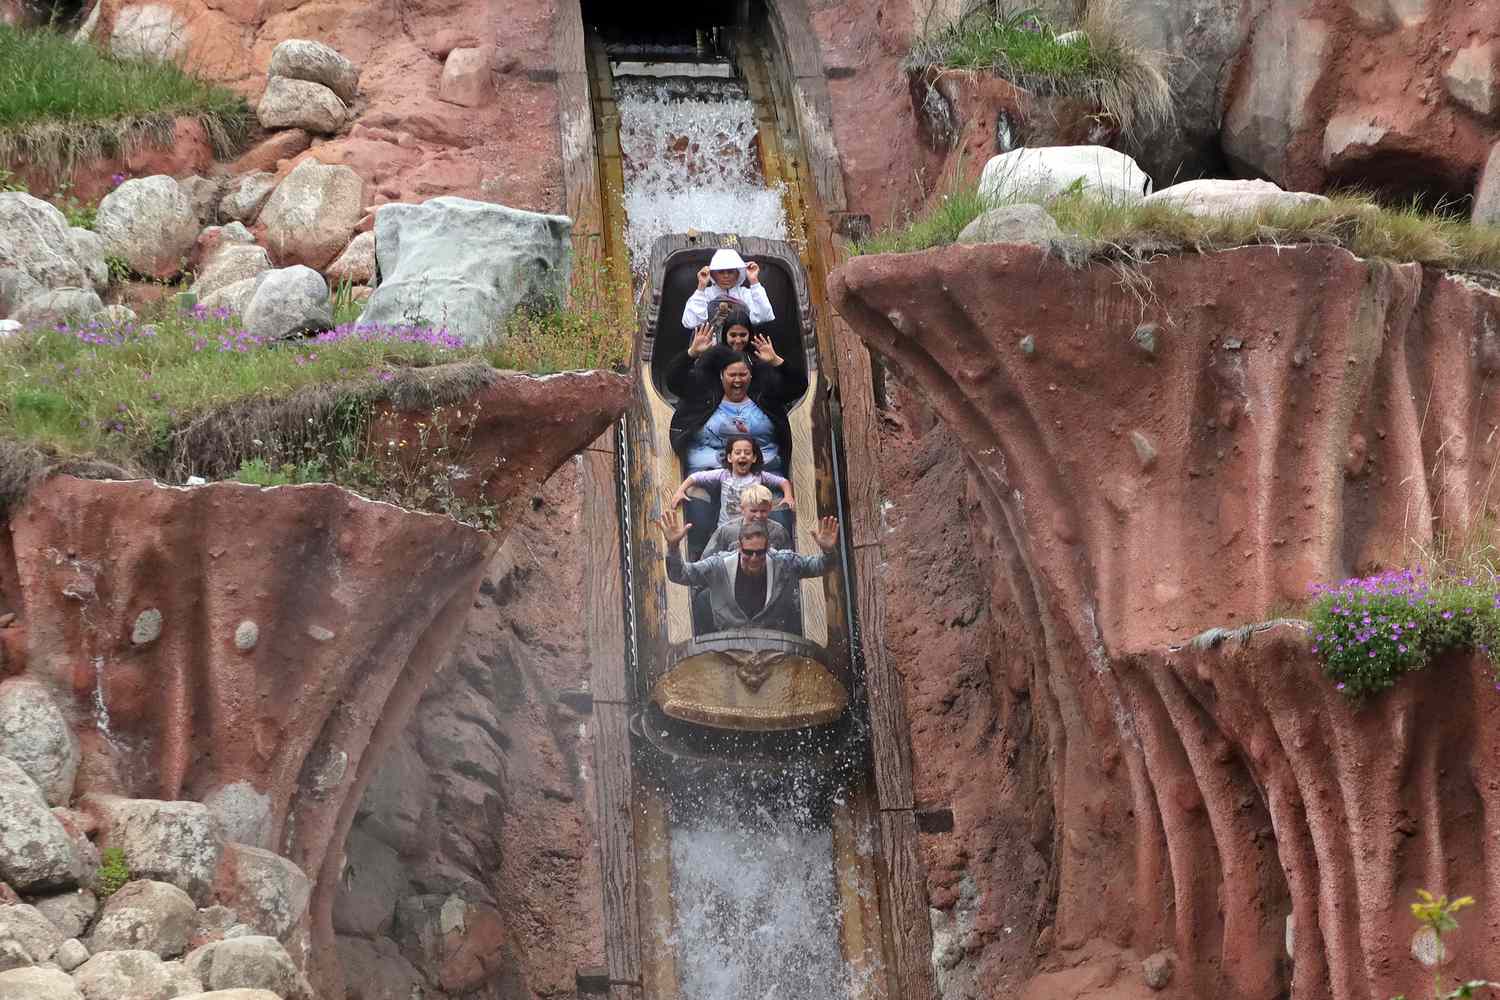 Disneyland rider seemingly jumps out of Splash Mountain boat mid-ride amid panic attack